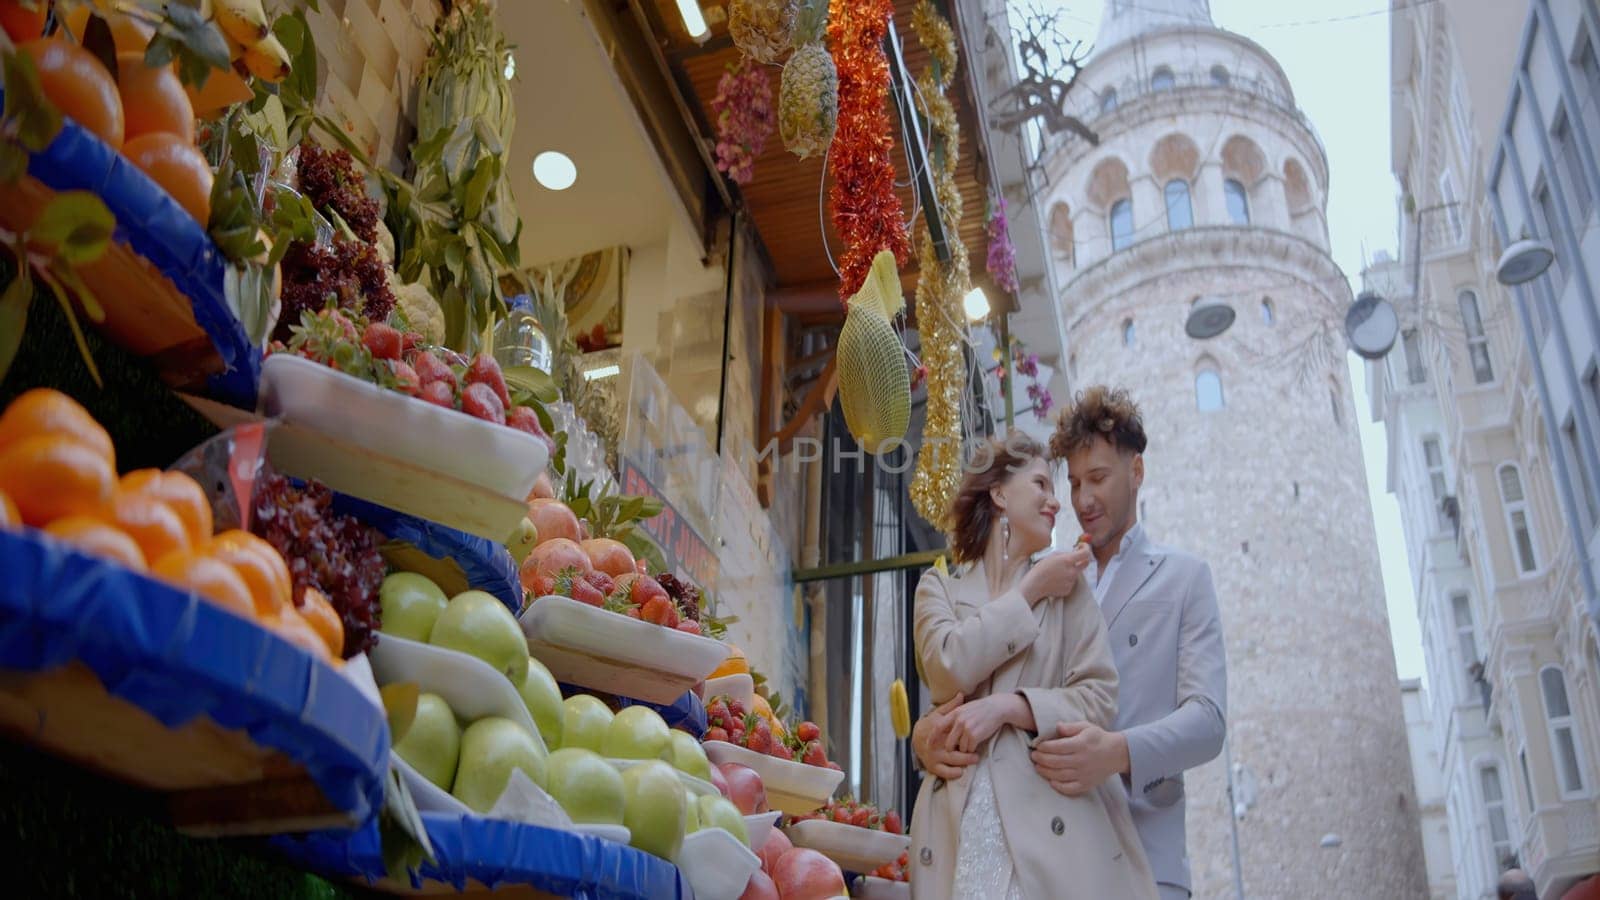 A young laughing couple. Action.An elegant couple is laughing next to fruit shops, a white tower and a blue sky can be seen from behind. High quality 4k footage